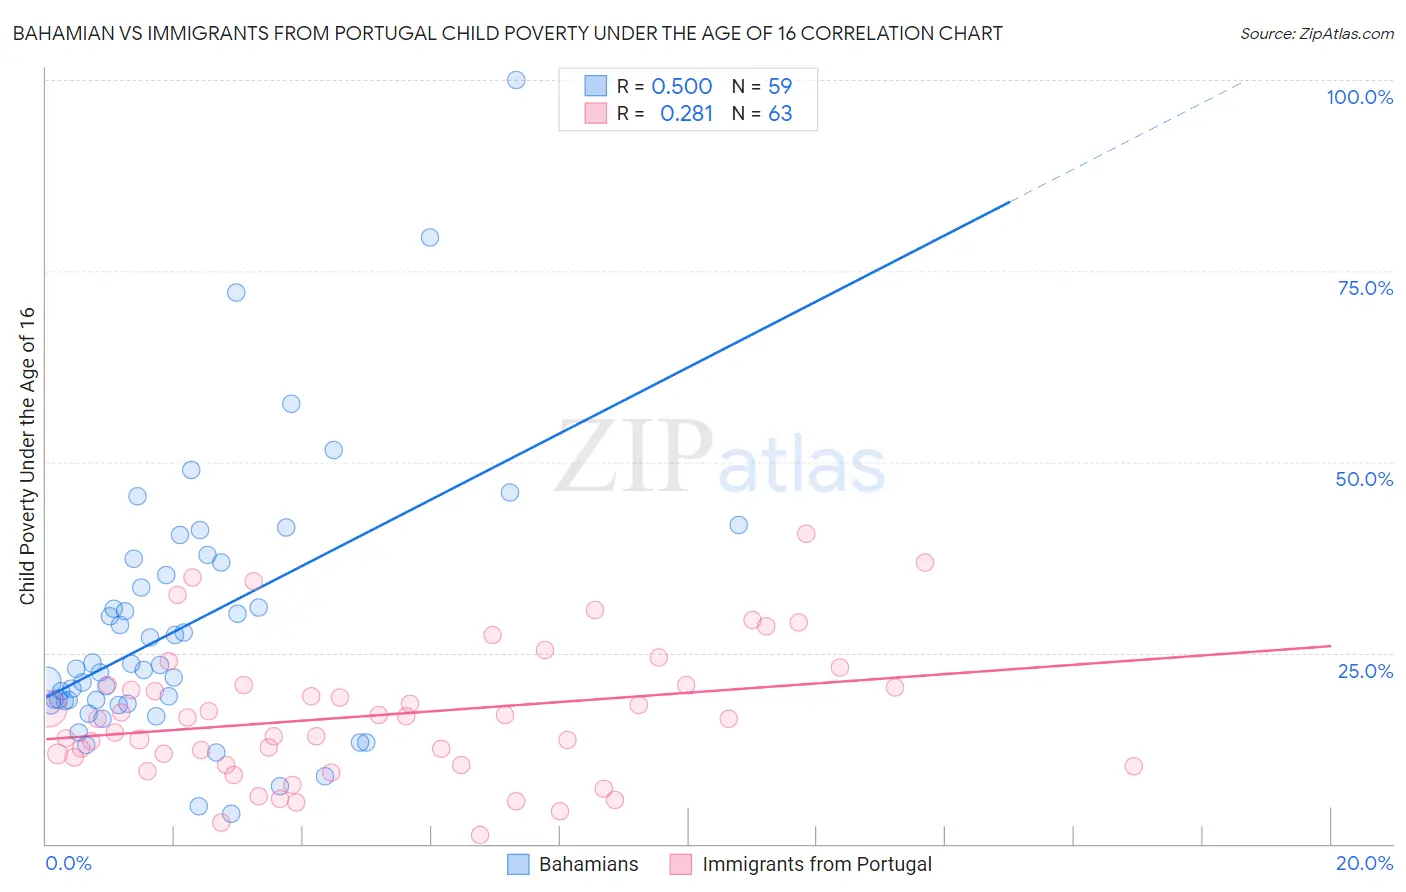 Bahamian vs Immigrants from Portugal Child Poverty Under the Age of 16